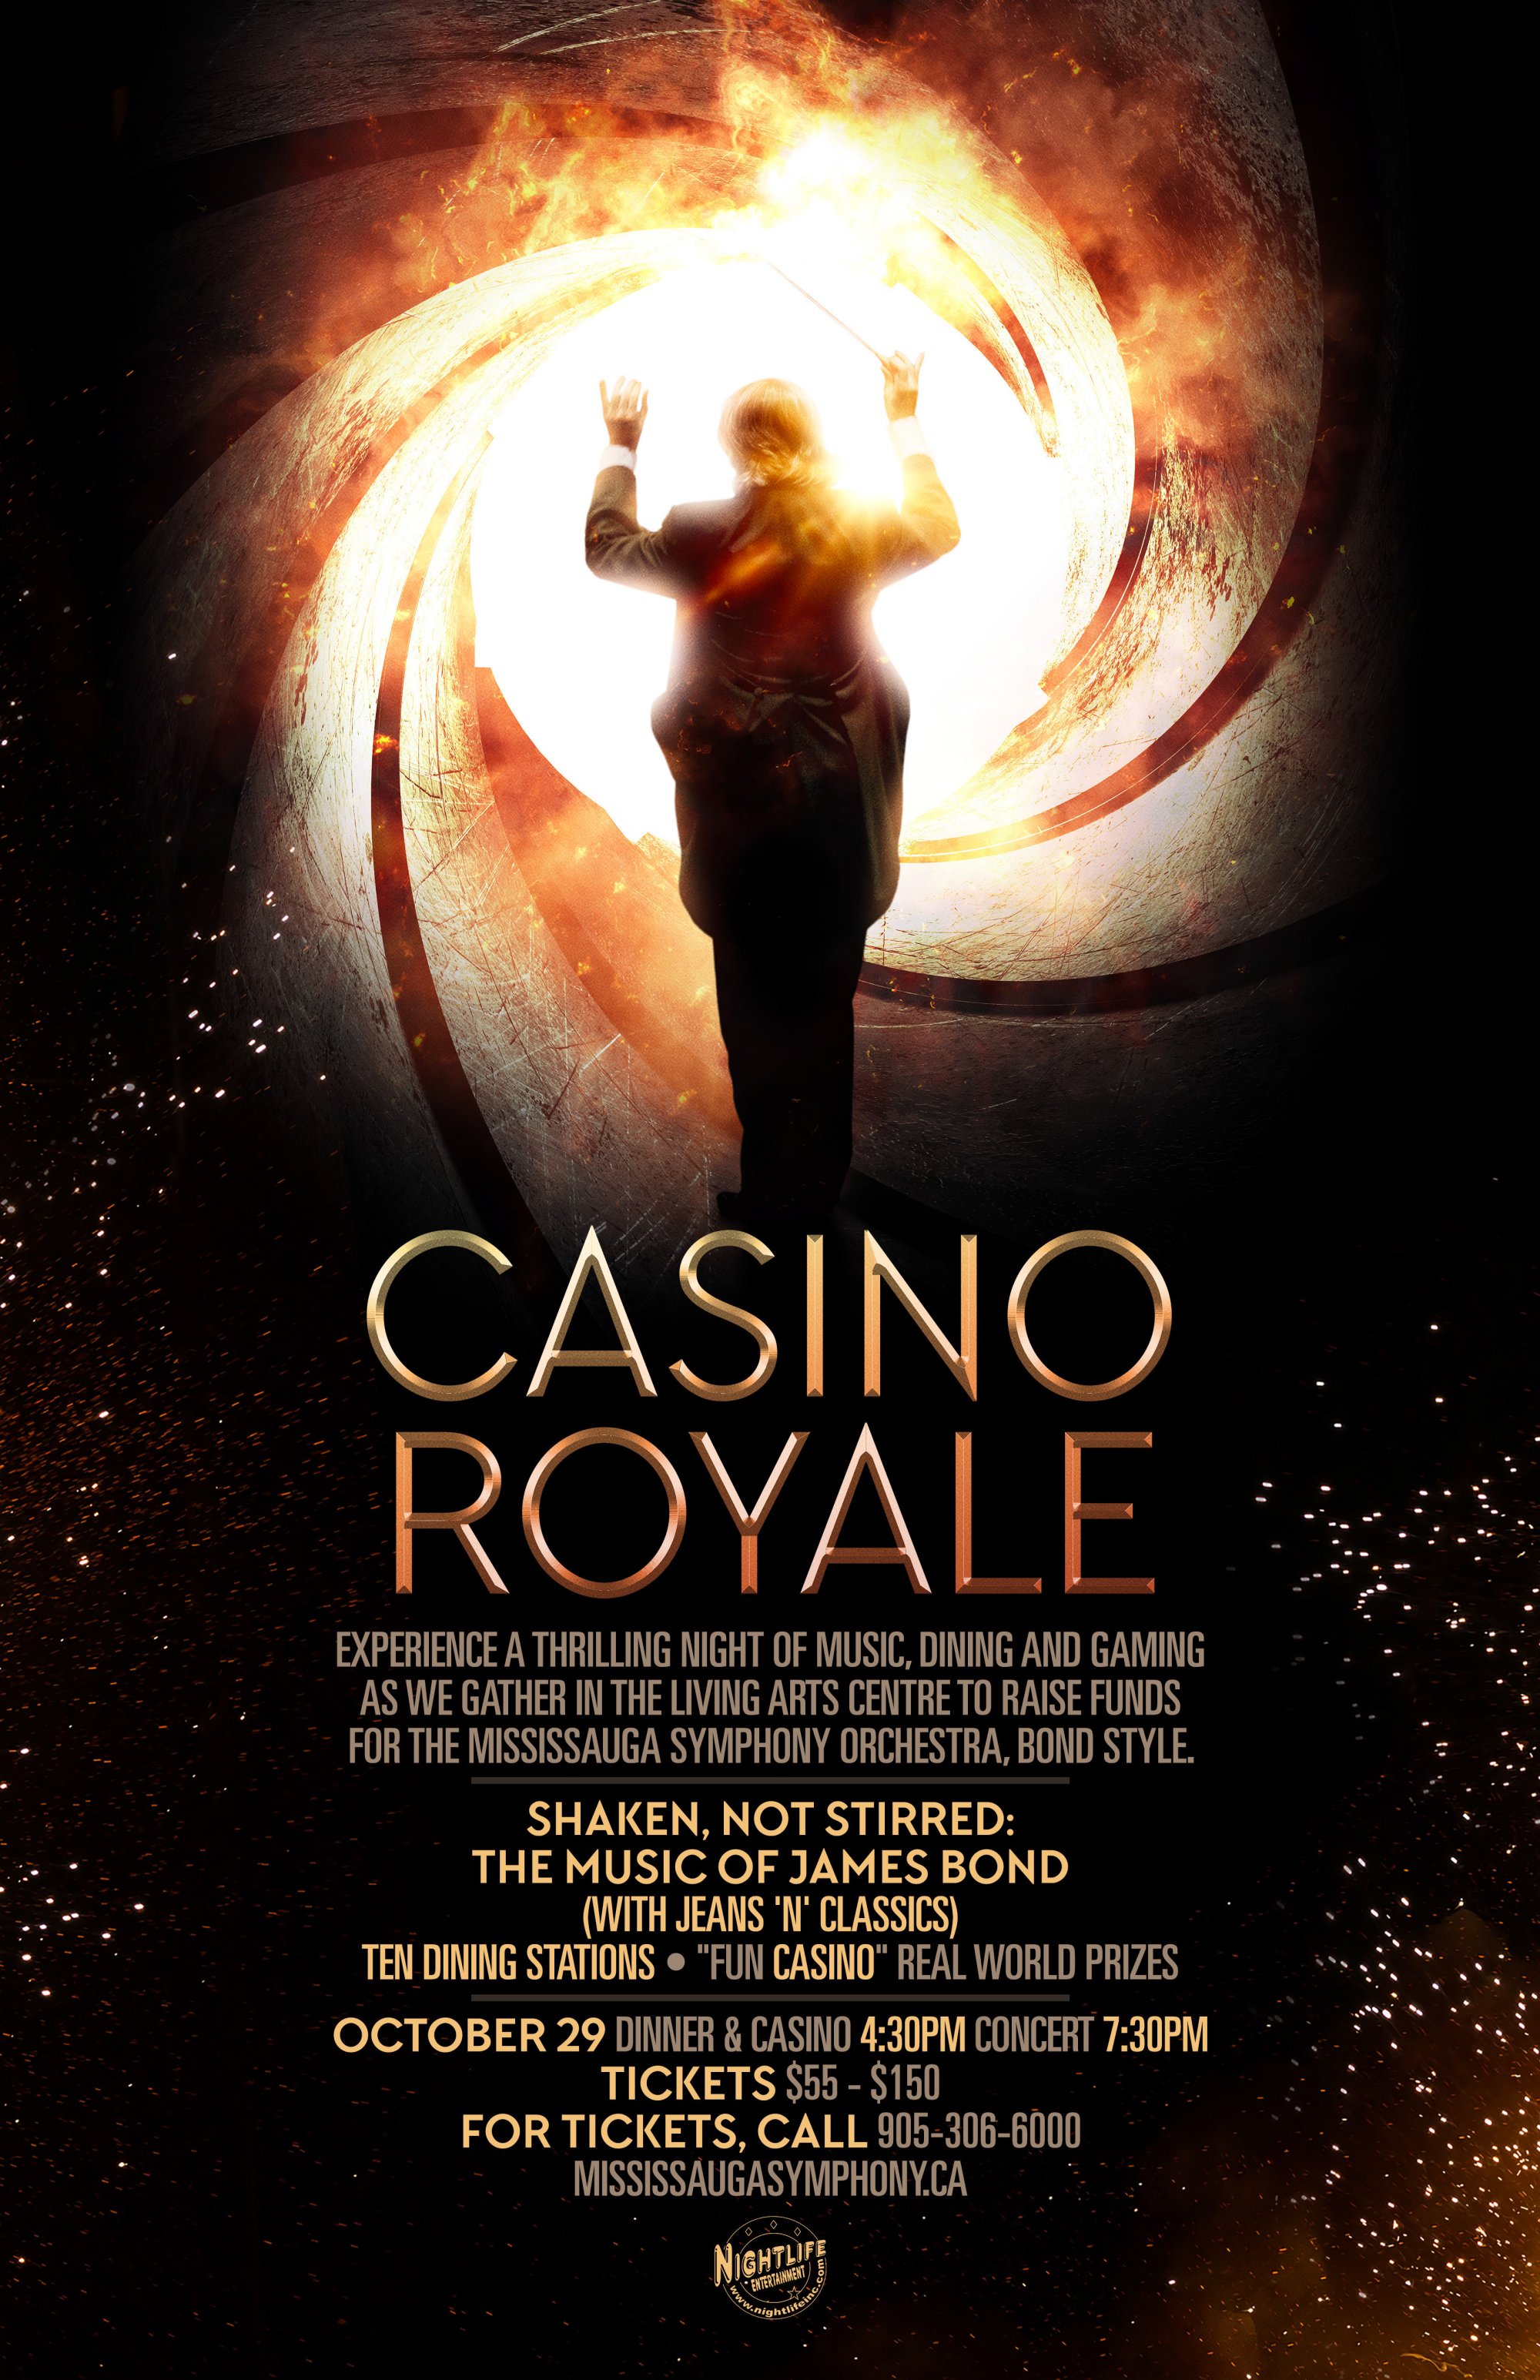 Casino Royale: Shaken, Not Stirred: The Music of James Bond image from Living Arts Centre email 23 Oct 2017